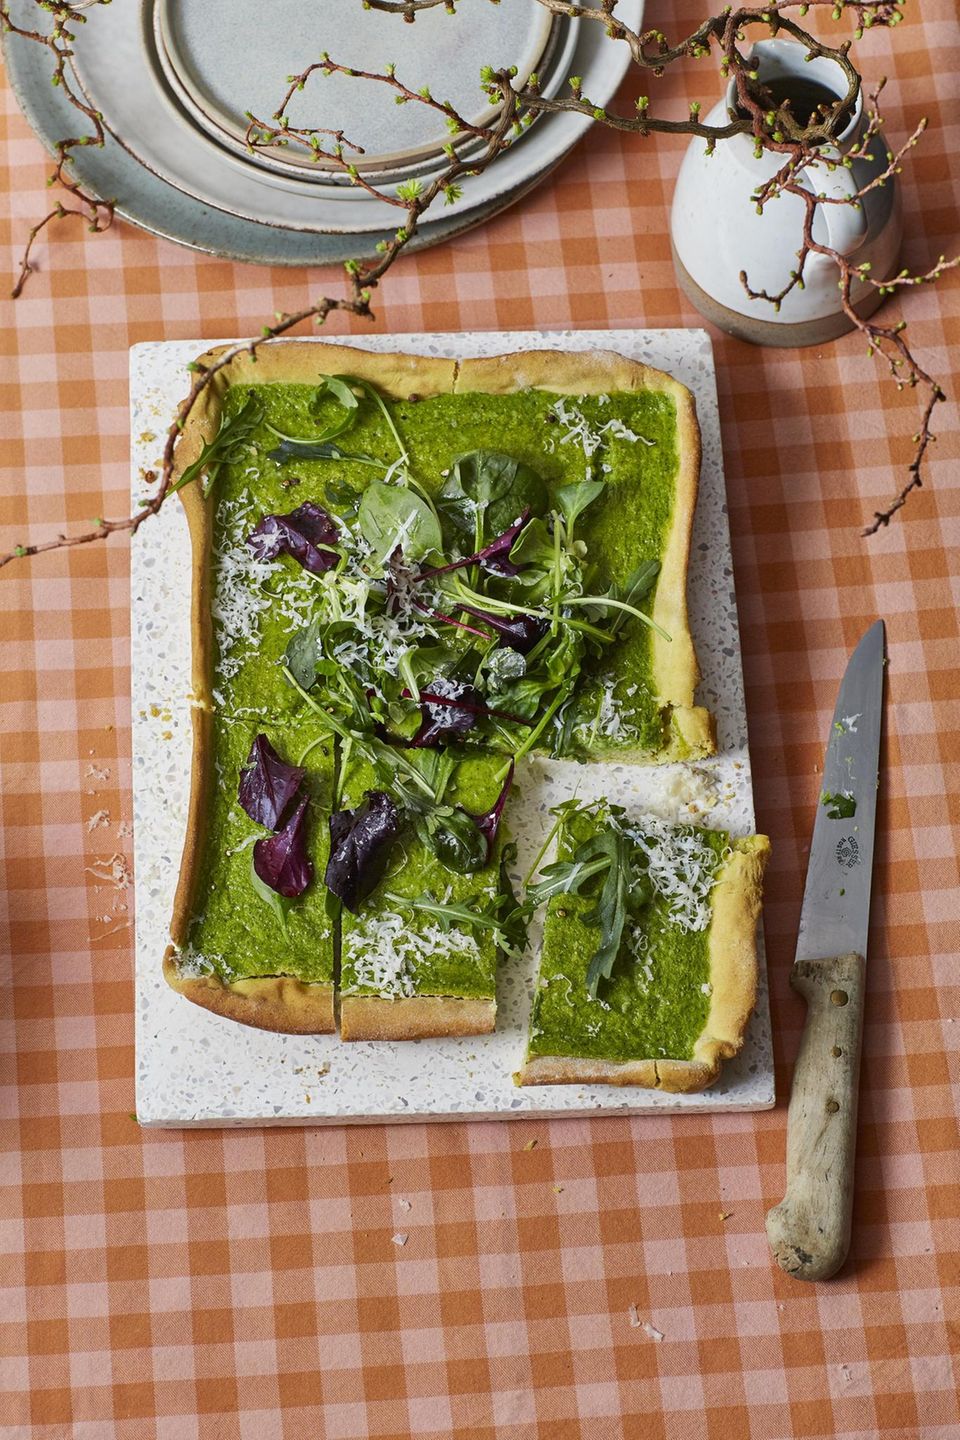 Super green: The quiche is the center of attention on the table (and tastes great!)